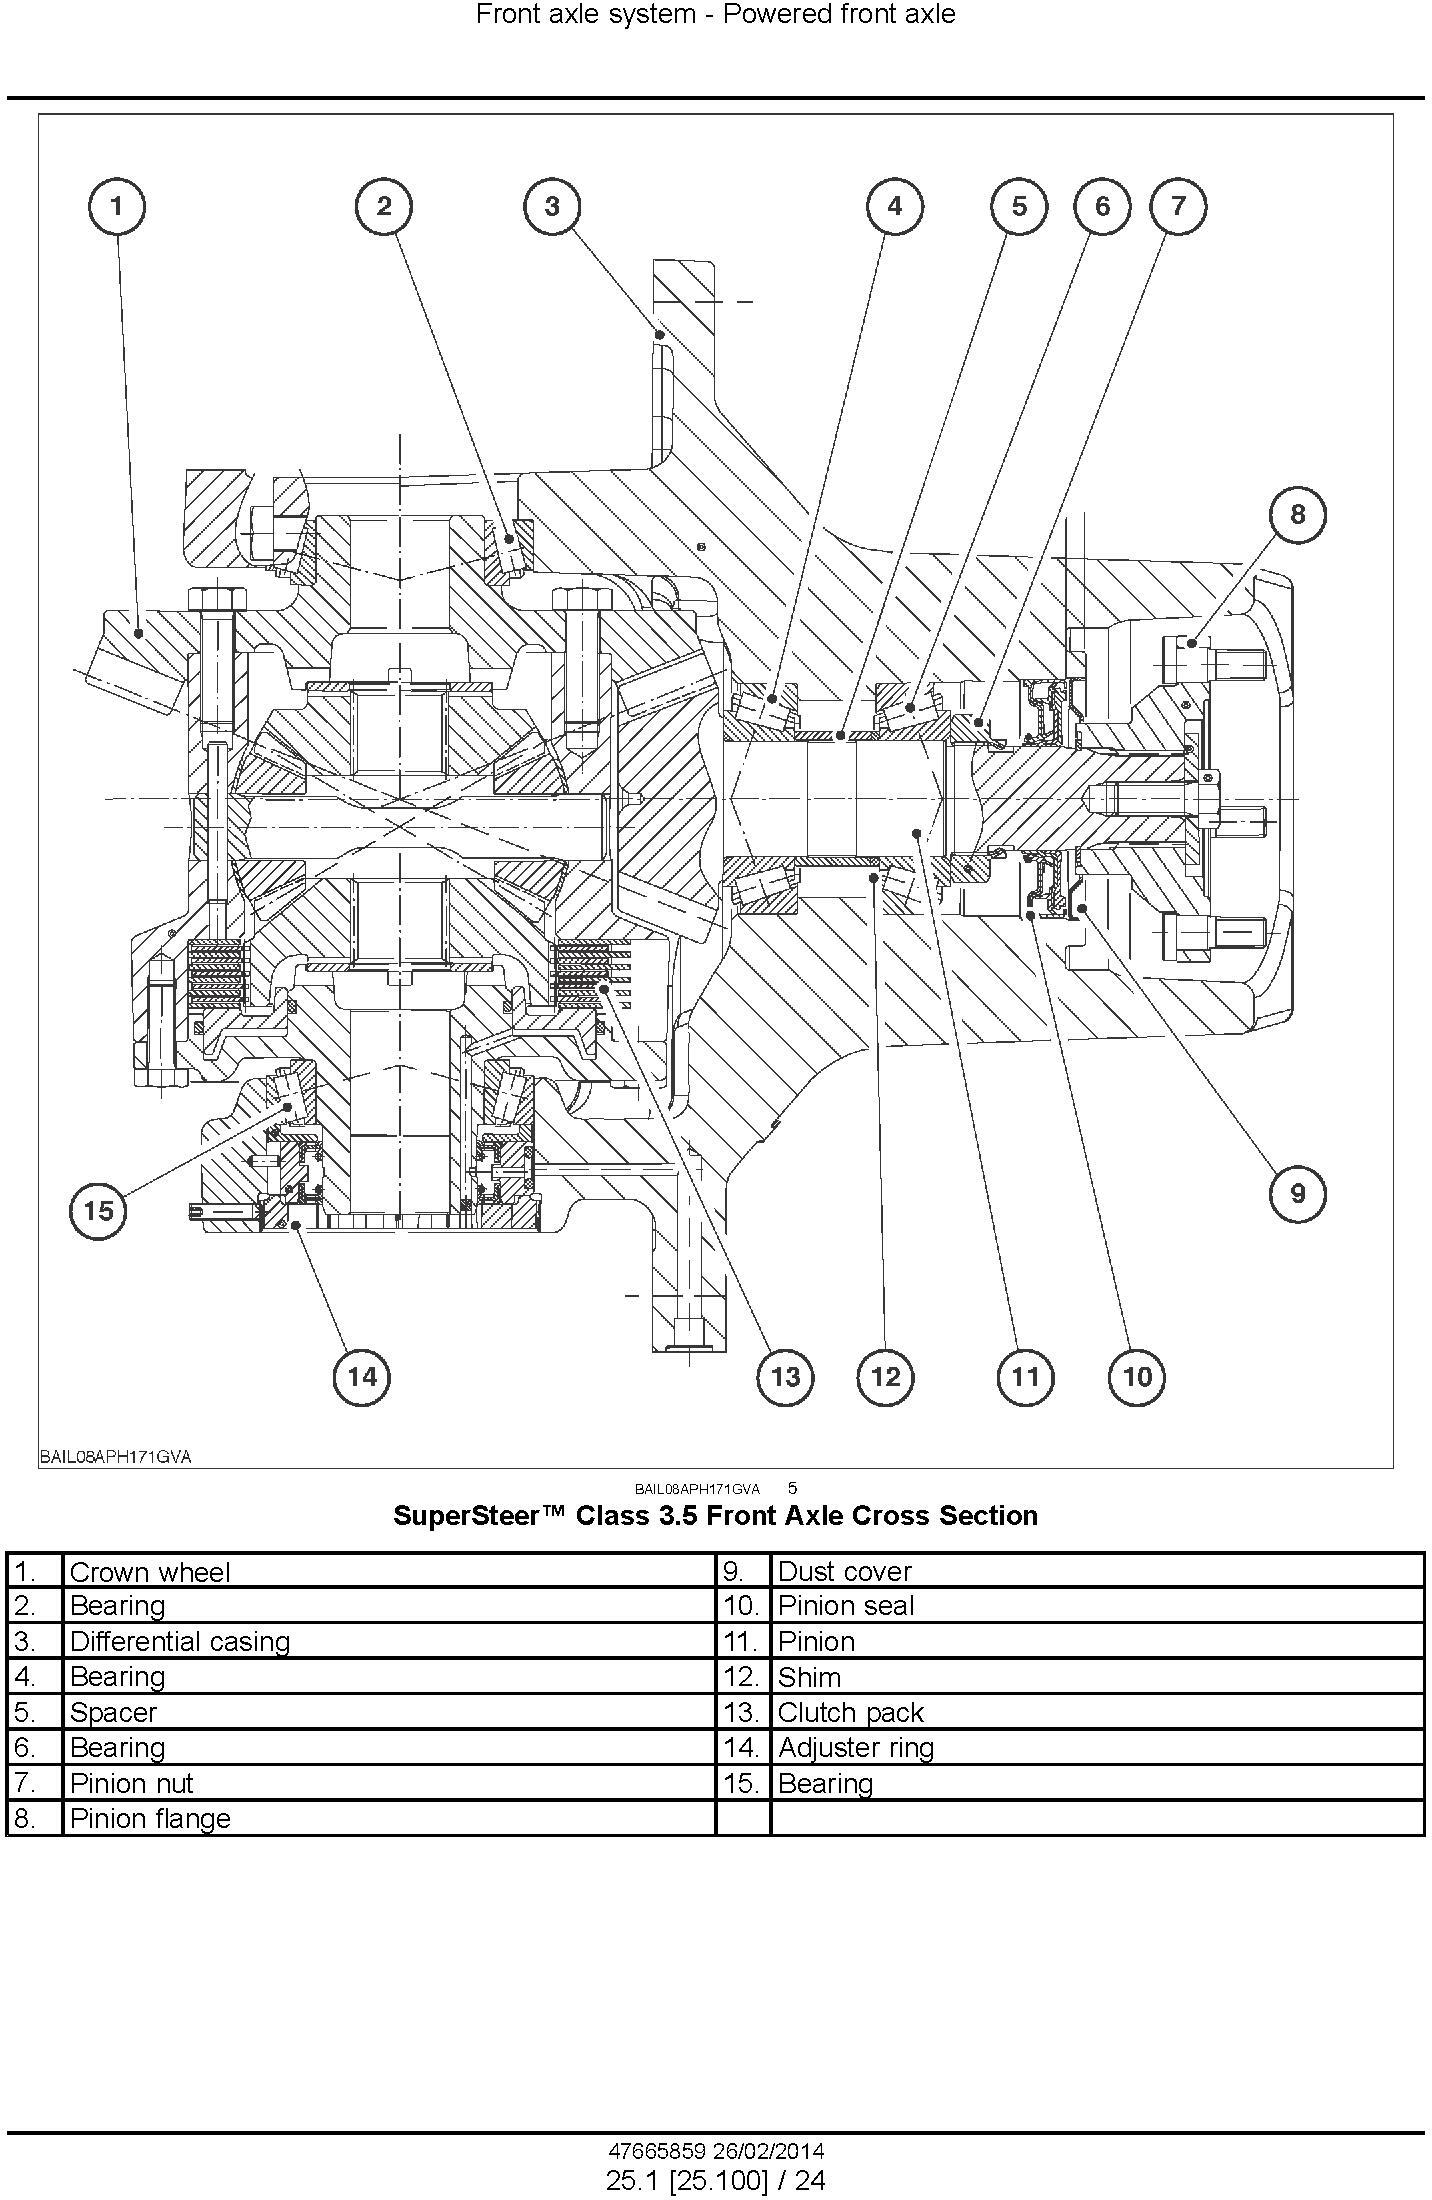 New Holland T6.120, T6.140, T6.150, T6.155, T6.160, T6.165, T6.175 European Tractor Service Manual - 3